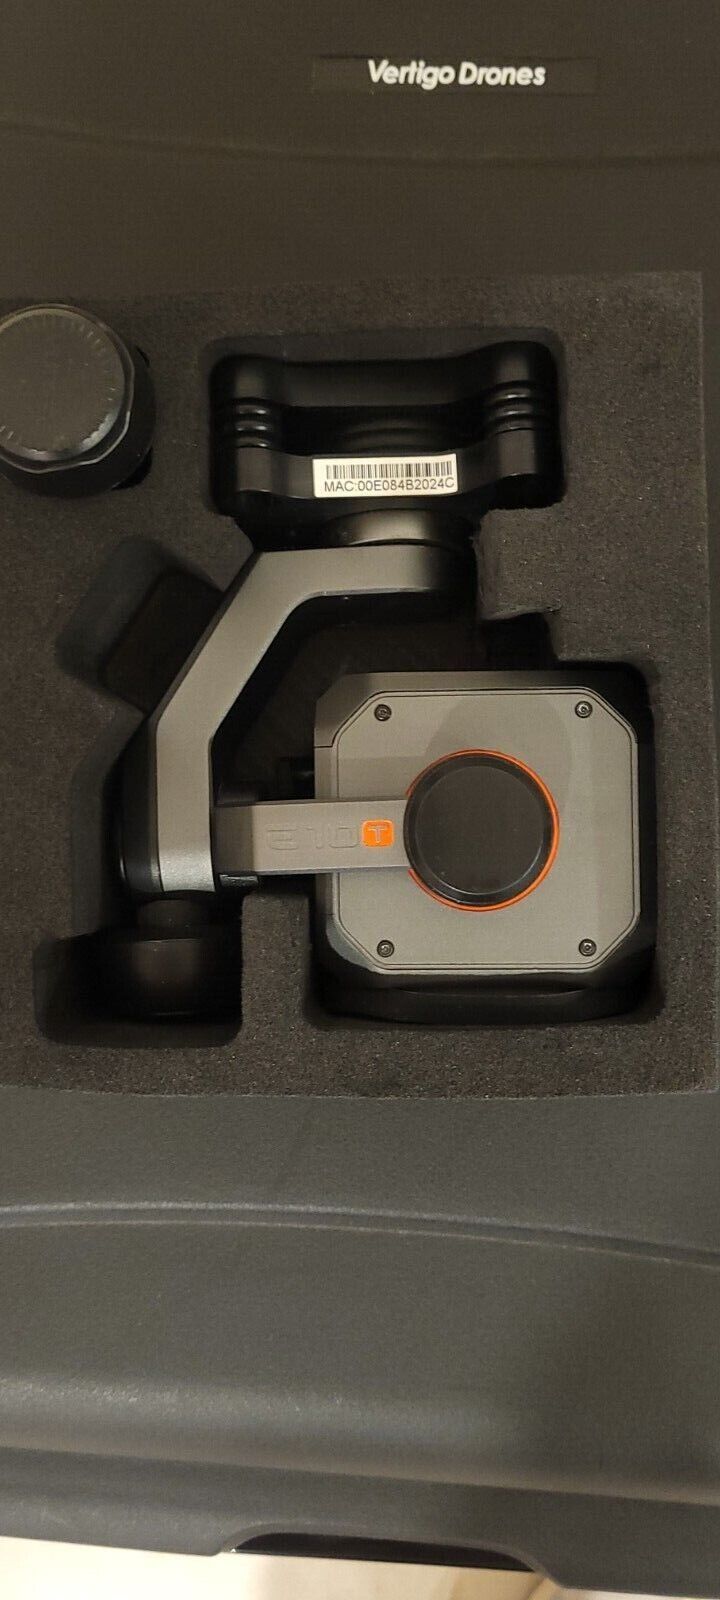 Yuneec H520 with Thermal Camera Package